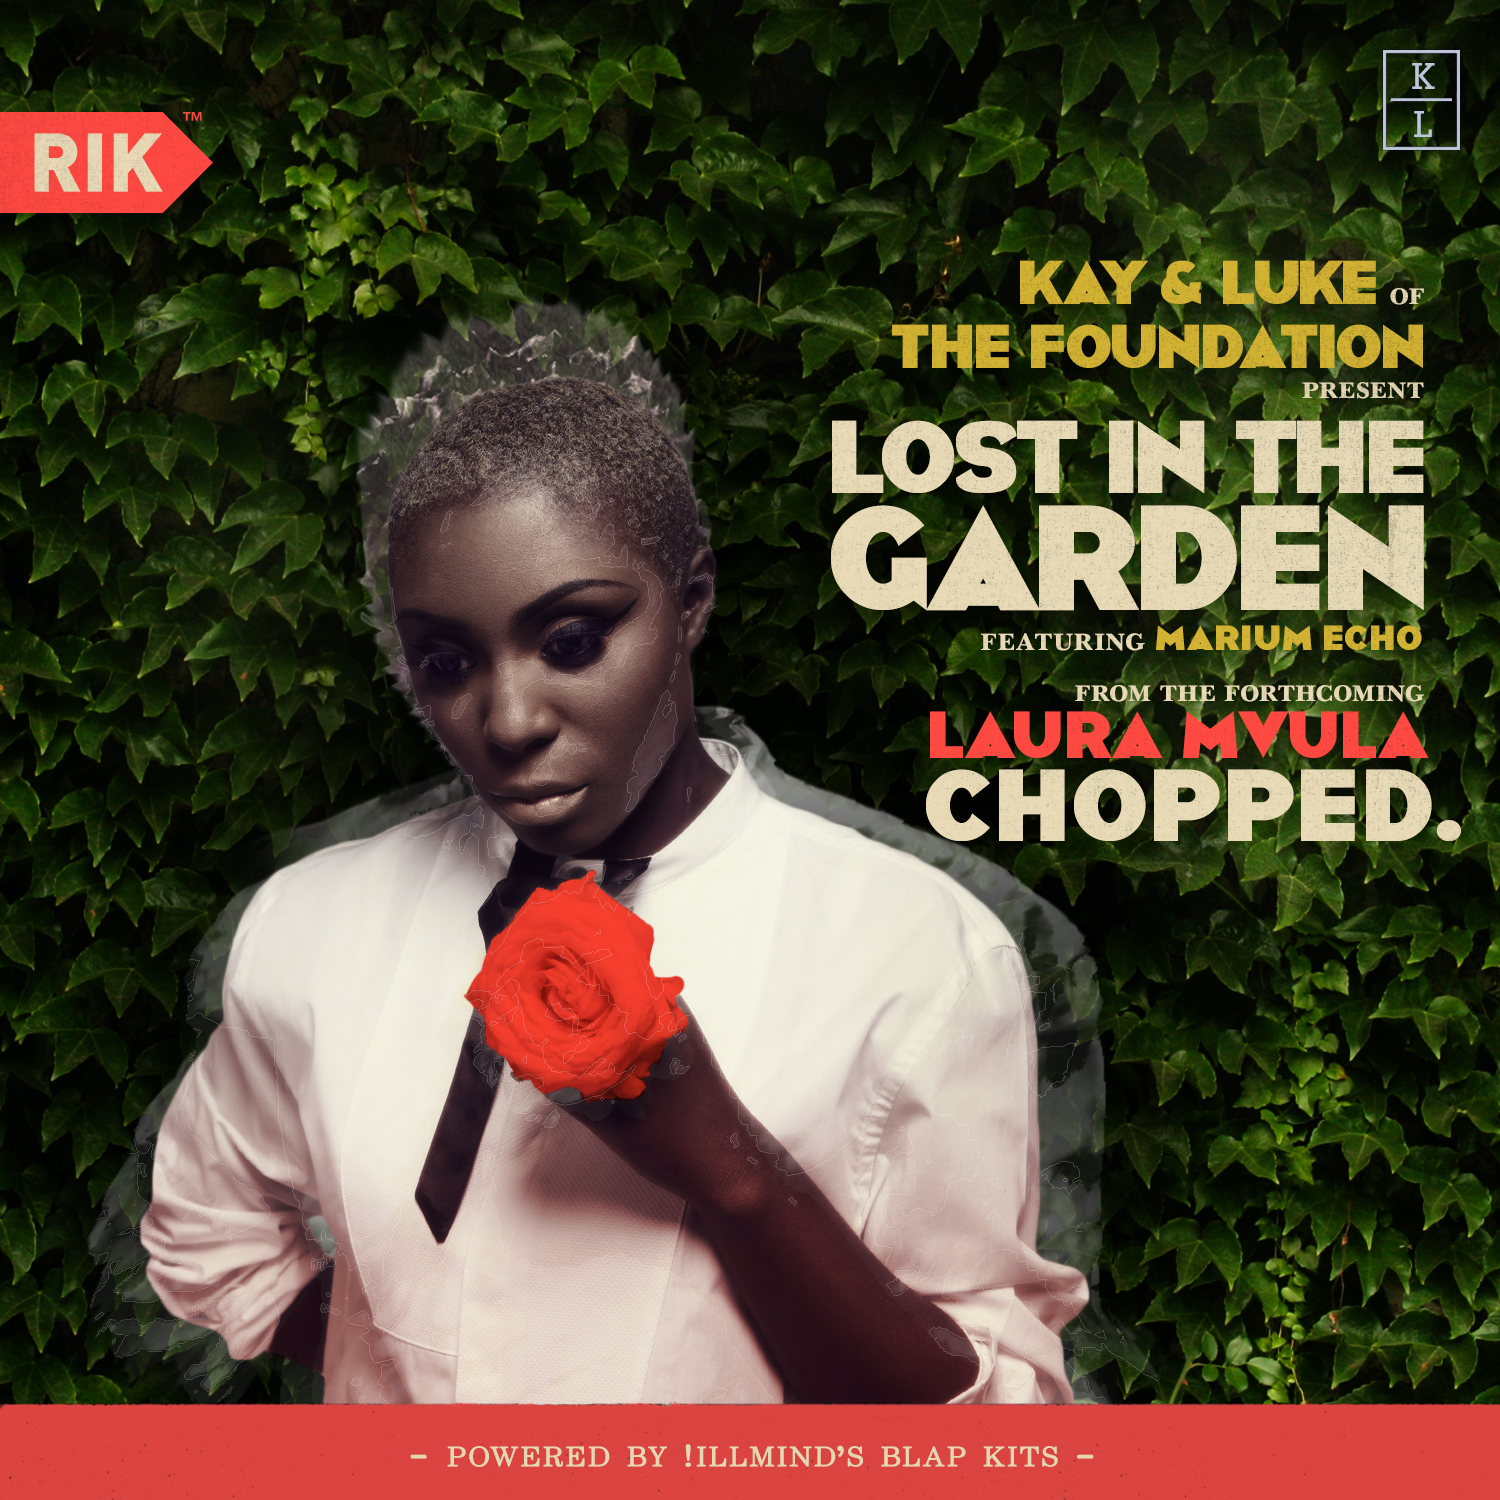 Kay & Luke (of The Foundation) — "Lost In The Garden"<br> featuring Marium Echo